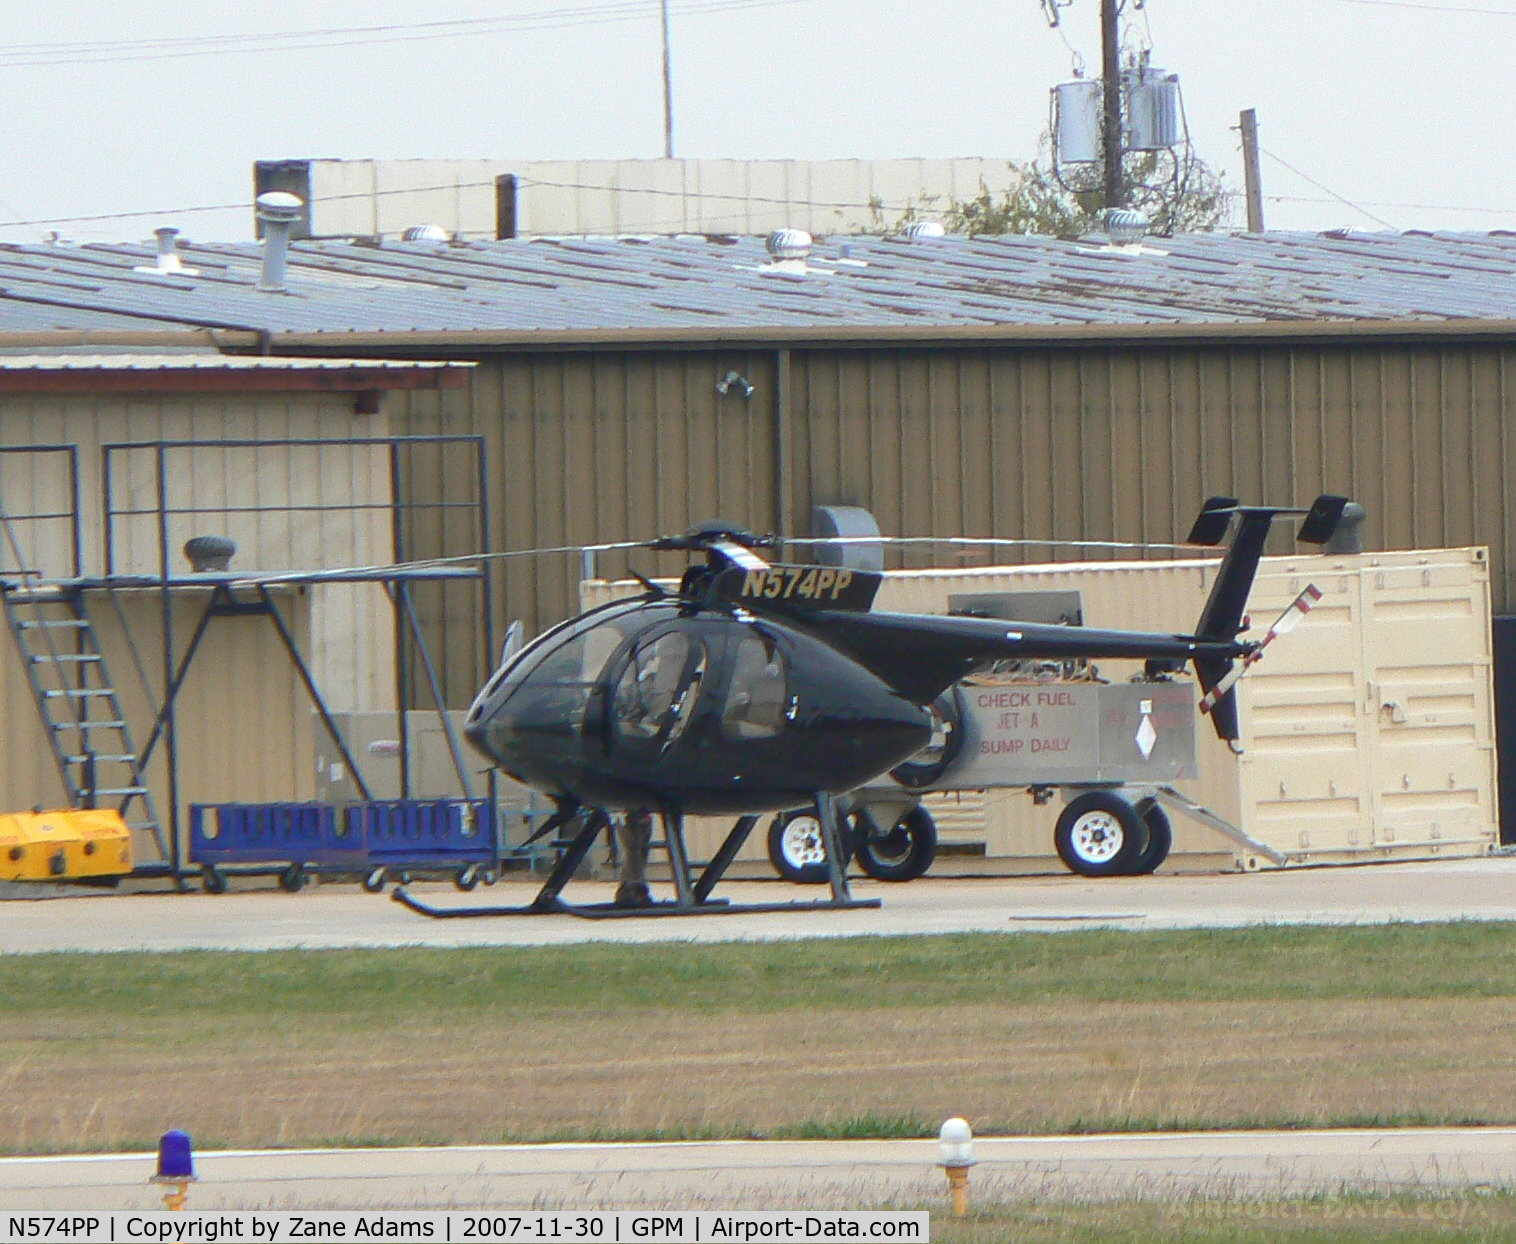 N574PP, MD Helicopters 369E C/N 0574E, New MD Helo at Grand Prairie